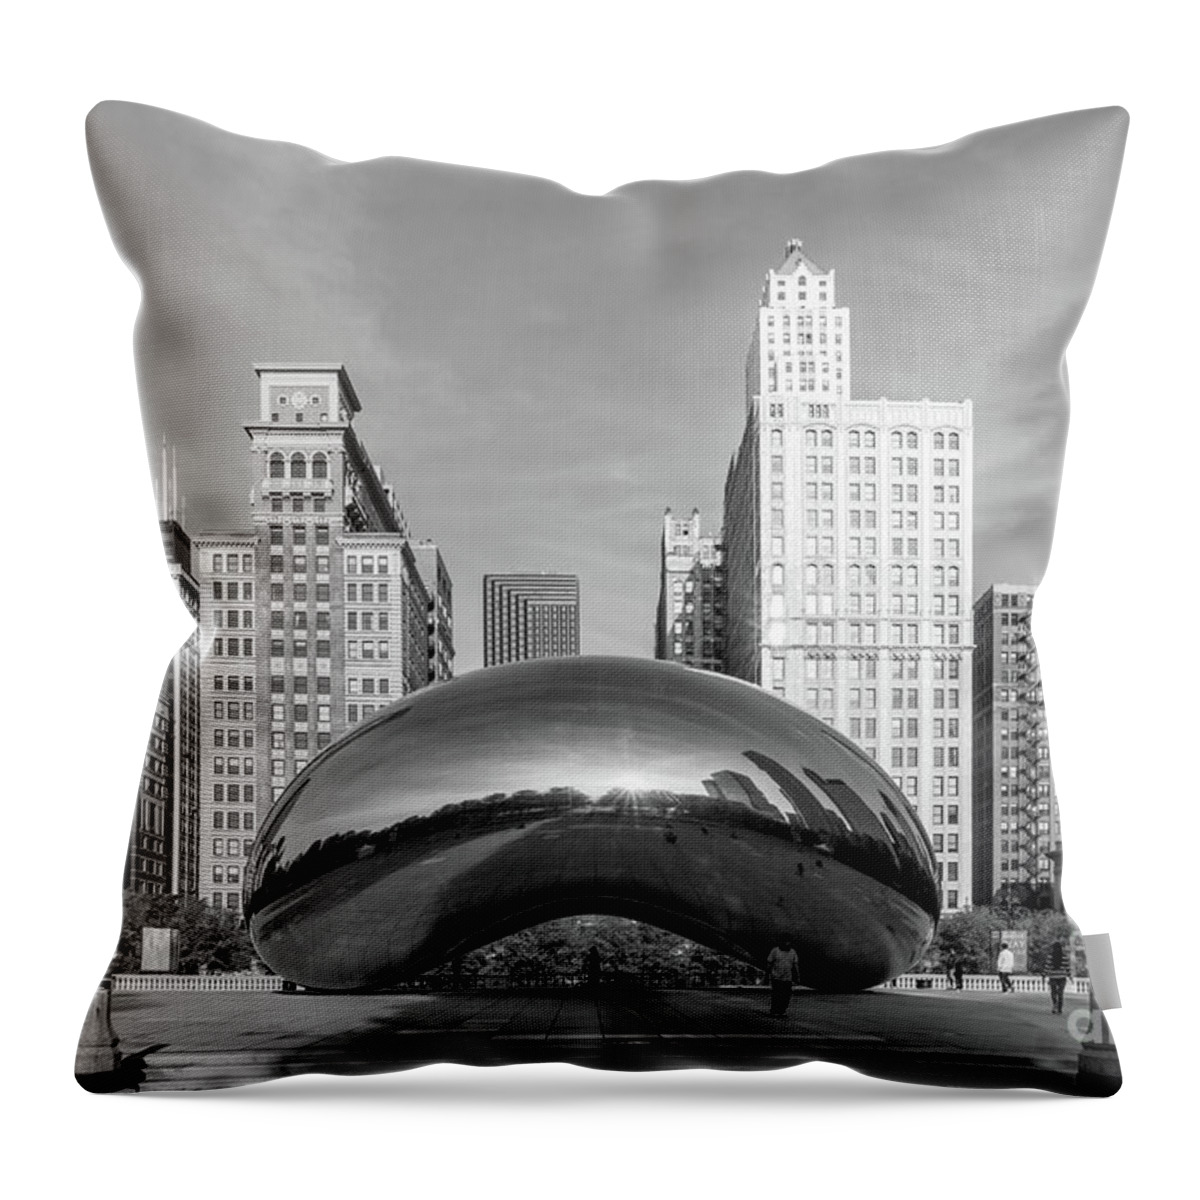 Chicago Throw Pillow featuring the photograph Quiet Millennium Morning Grayscale by Jennifer White